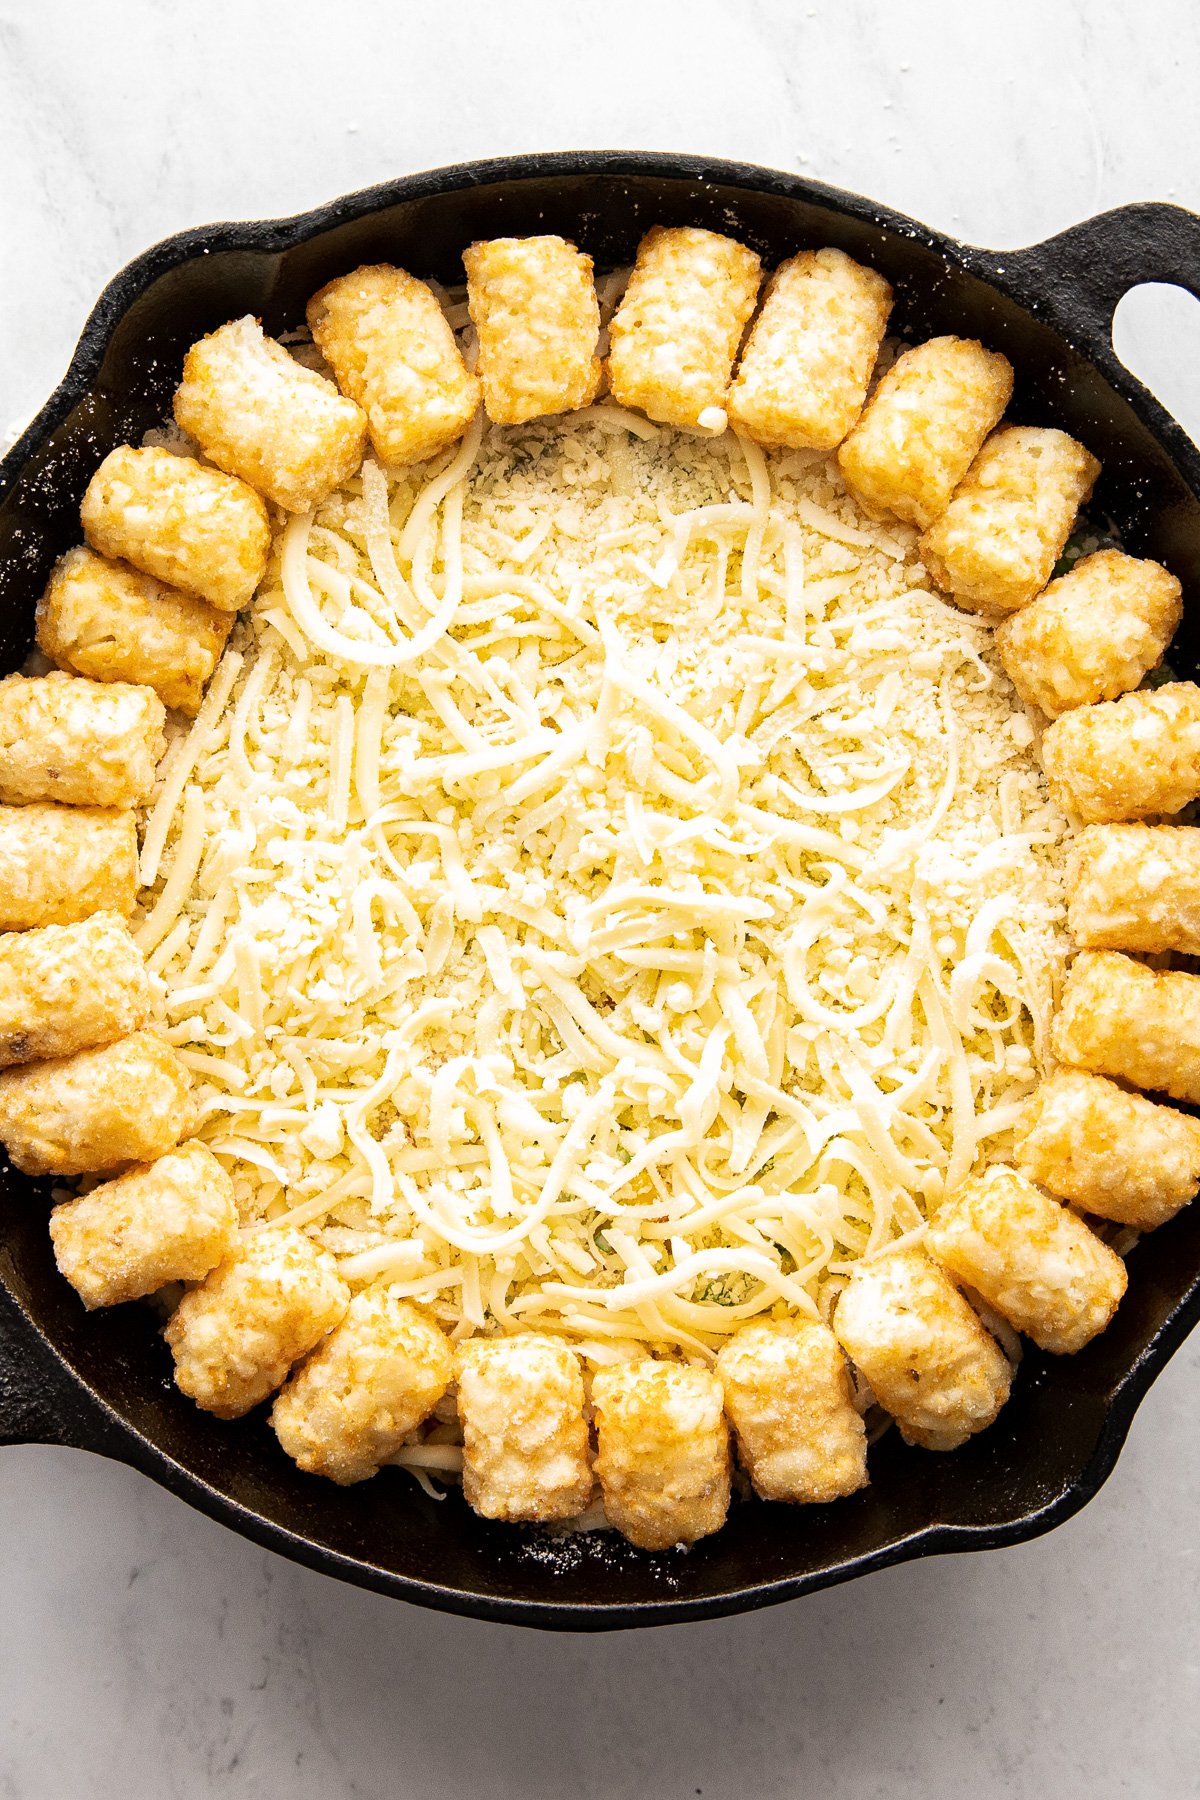 Tater tots in first circle around hotdish in skillet.